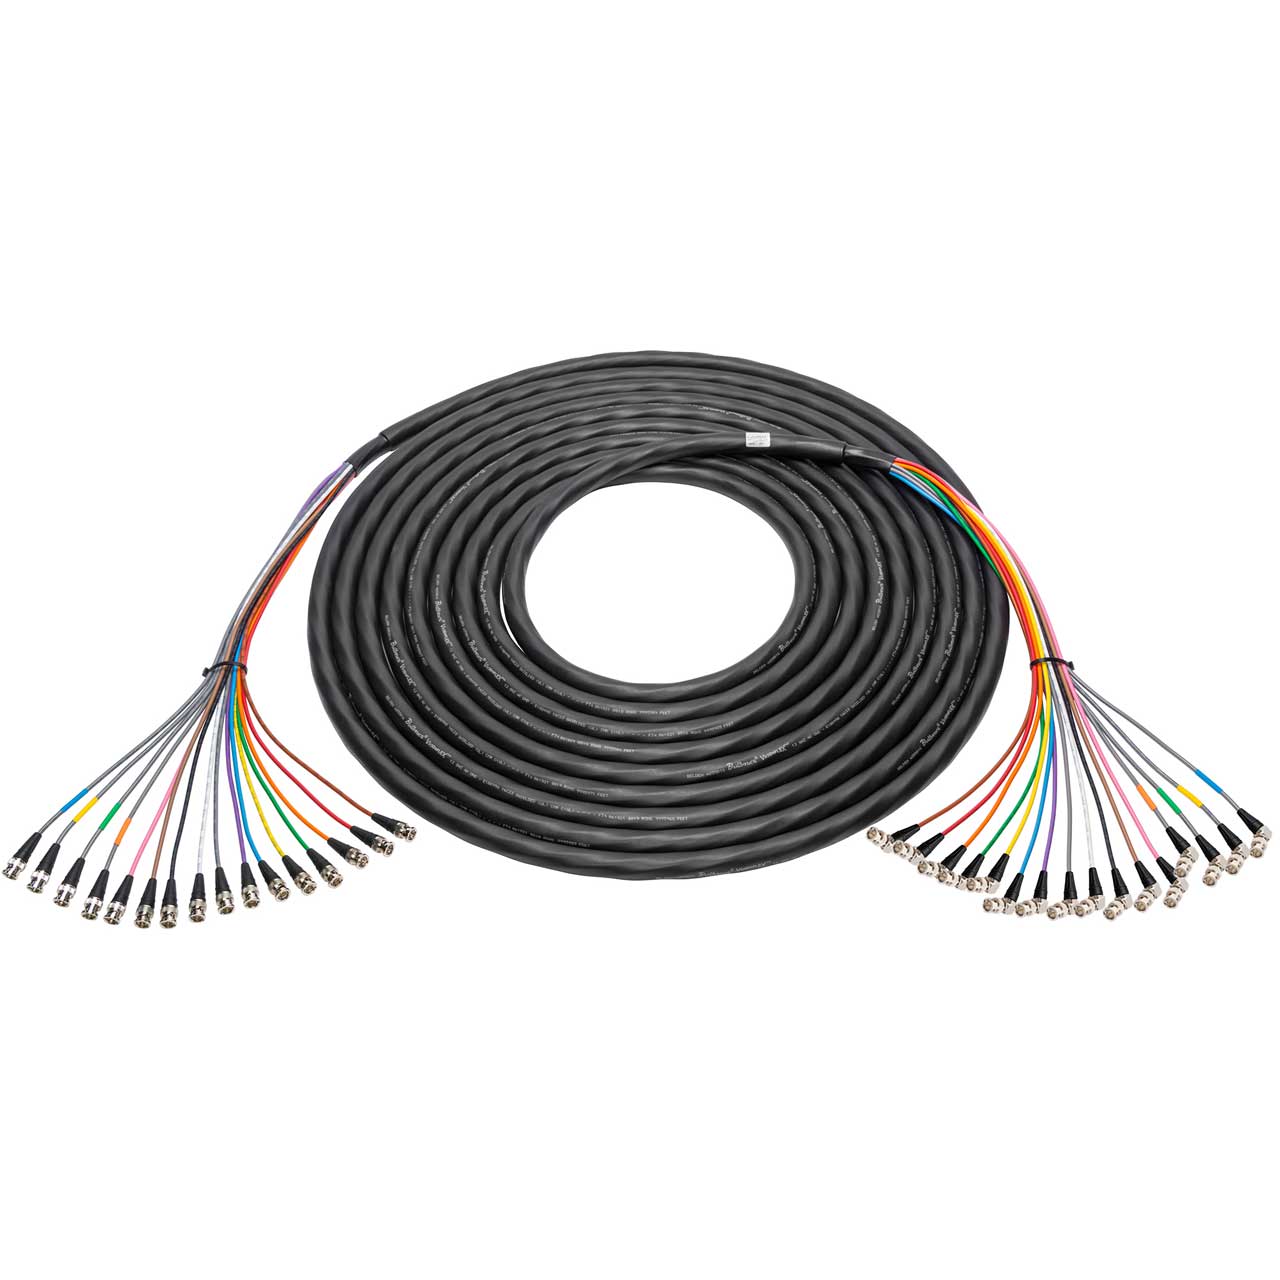 Laird 4855R16-BBA-075 16-Channel 12G-SDI/4K UHD BNC Male to Right Angle BNC Male Snake Cable - 75 Foot 4855R16-BBA-075